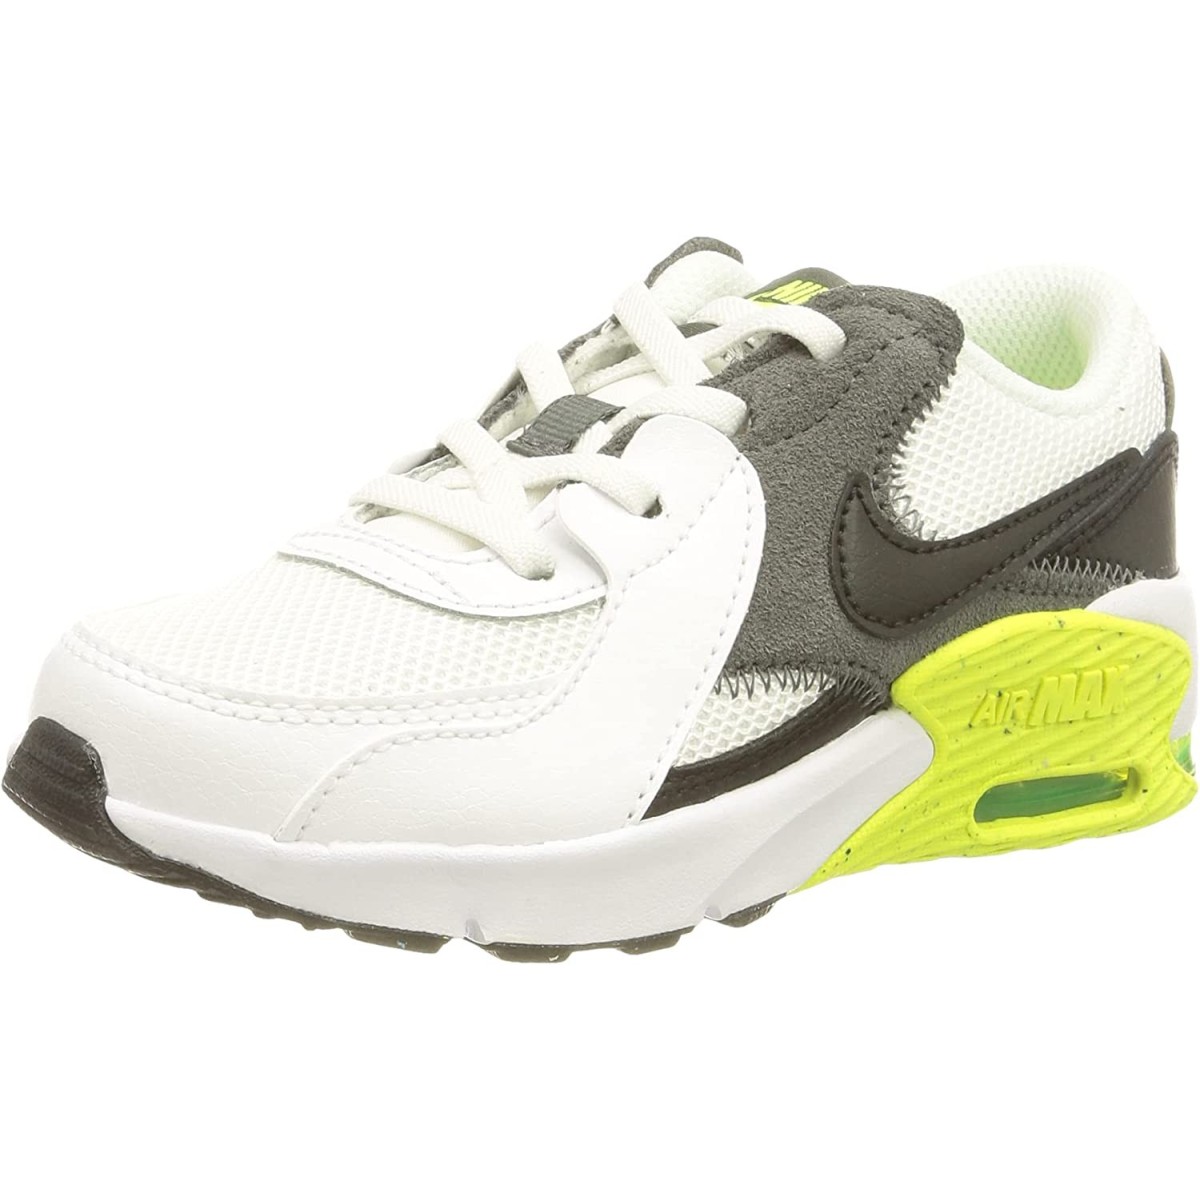 CD6892 110 MAX EXCEE white/black-iron NIKE (PS) AIR Shoes grey-volt